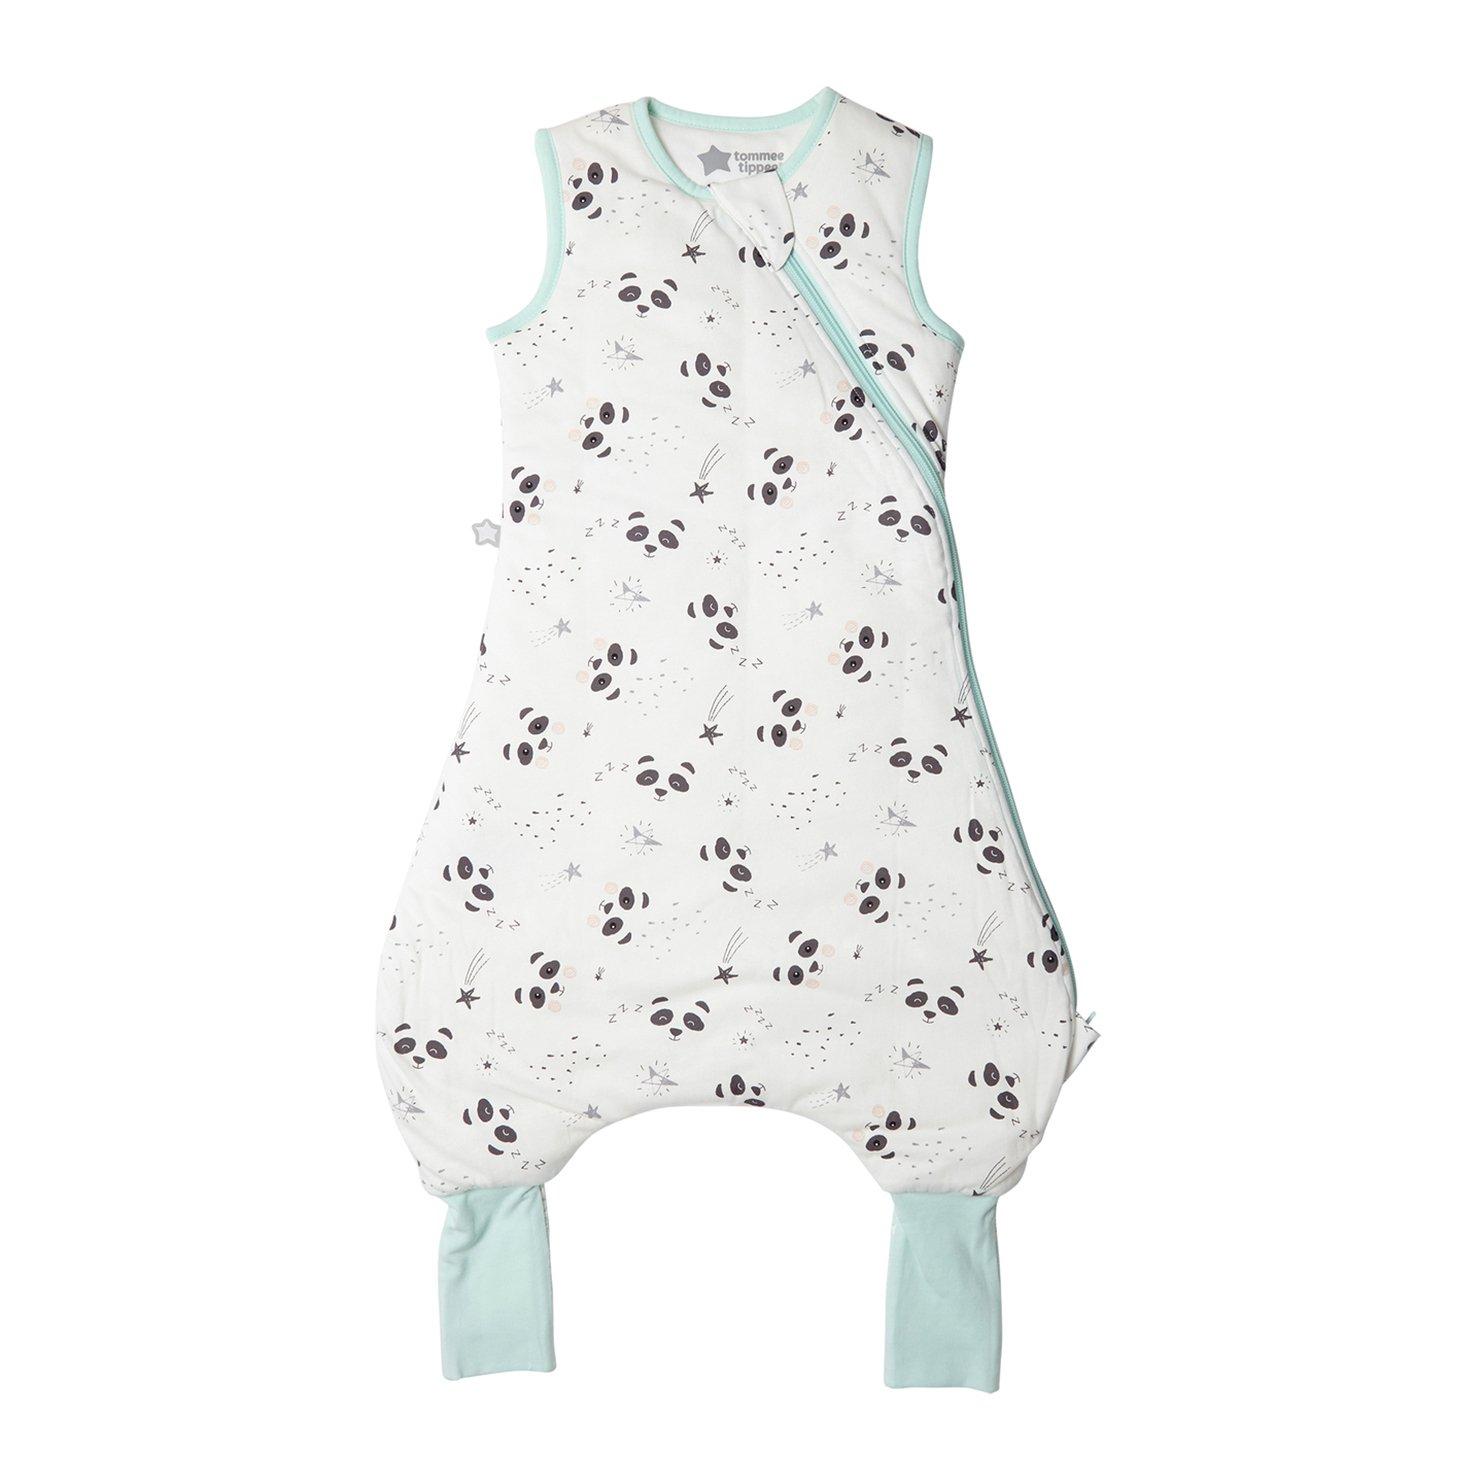 Tommee Tippee Steppee Baby Romper 6-18m, 2.5 Tog Little Pip Review